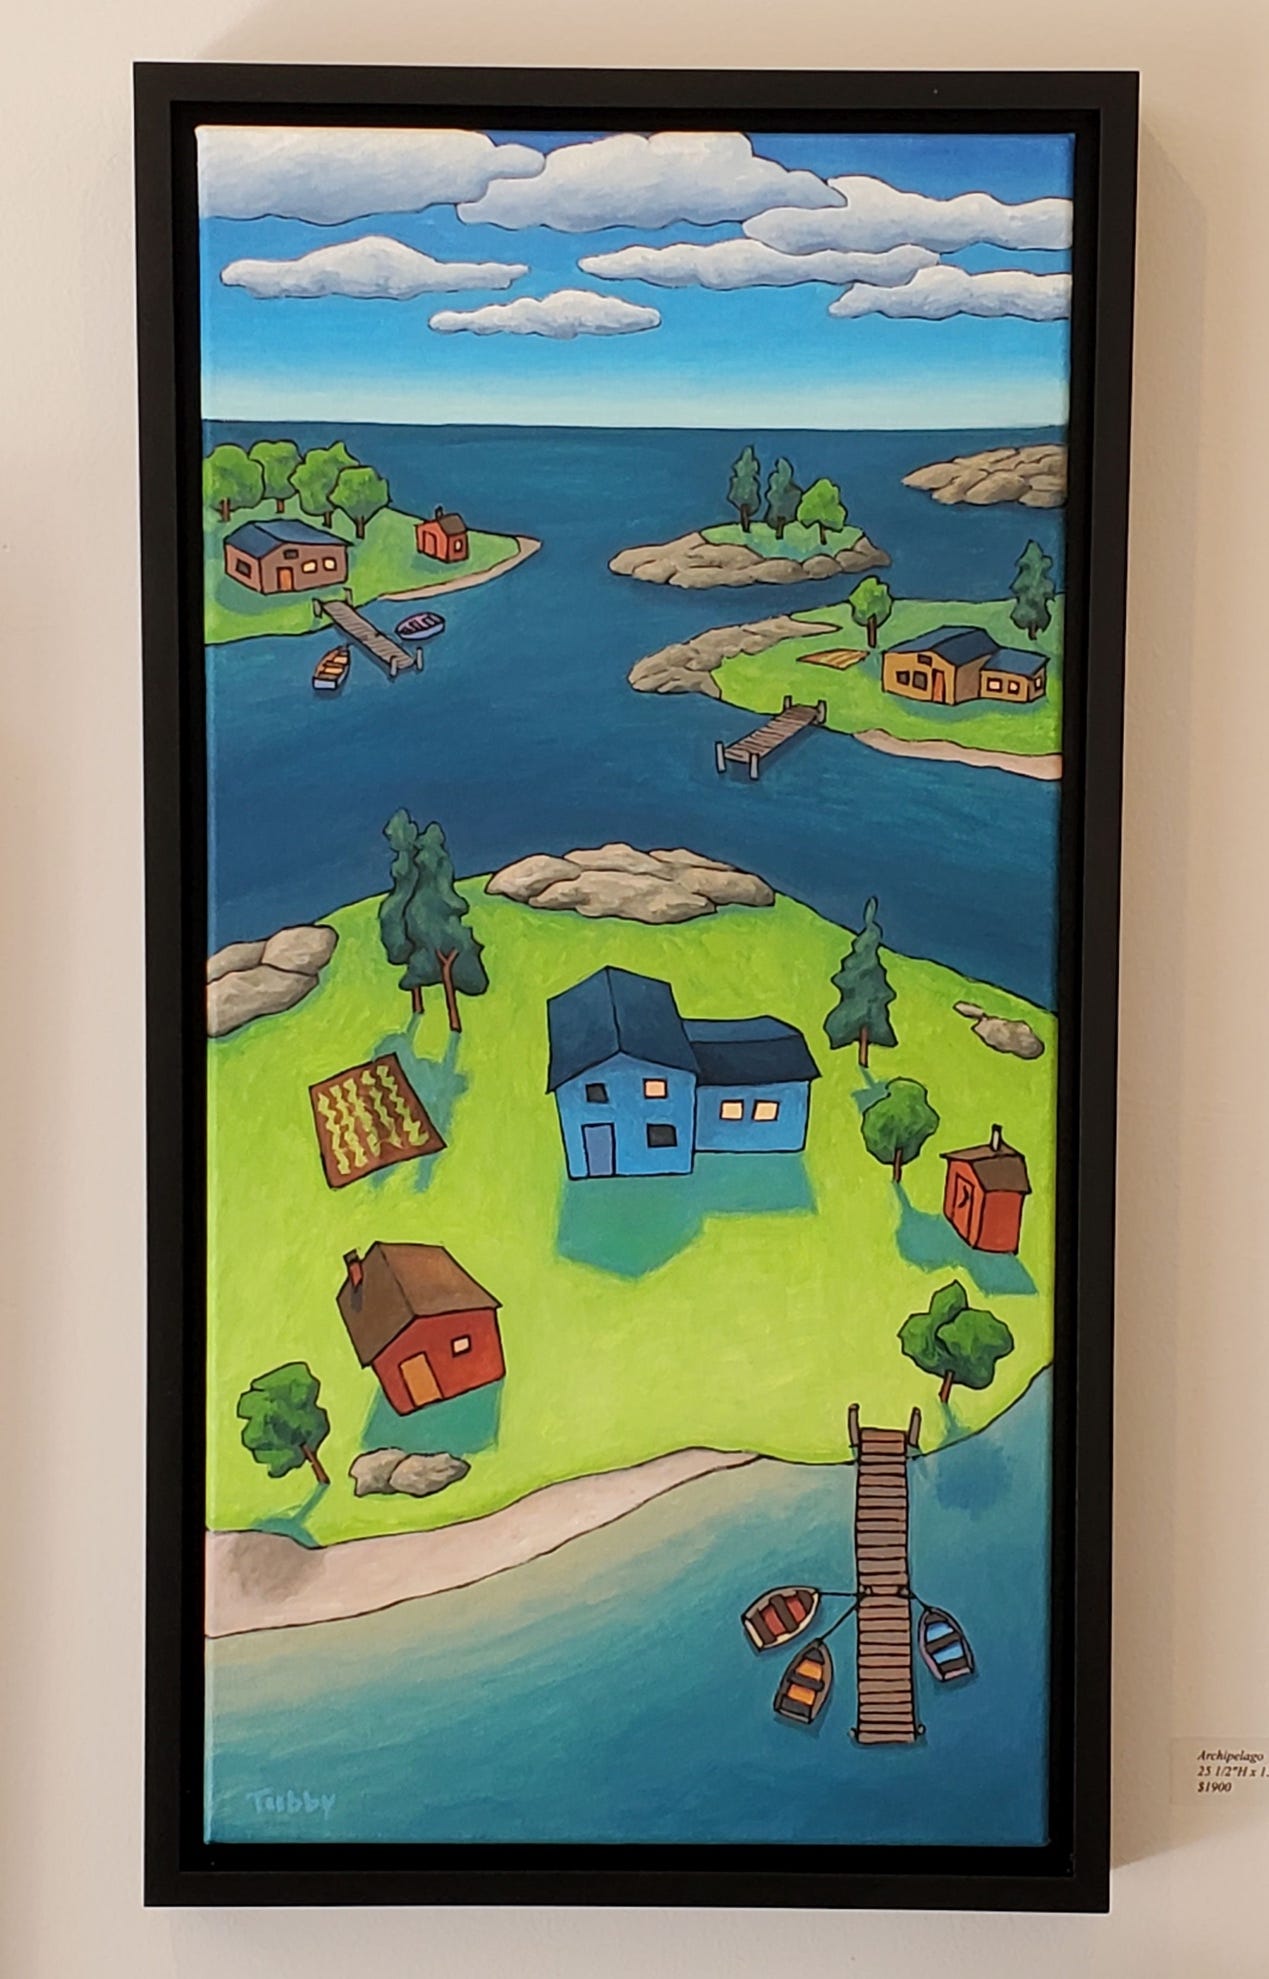 A painting of a landscape with houses and water

Description automatically generated